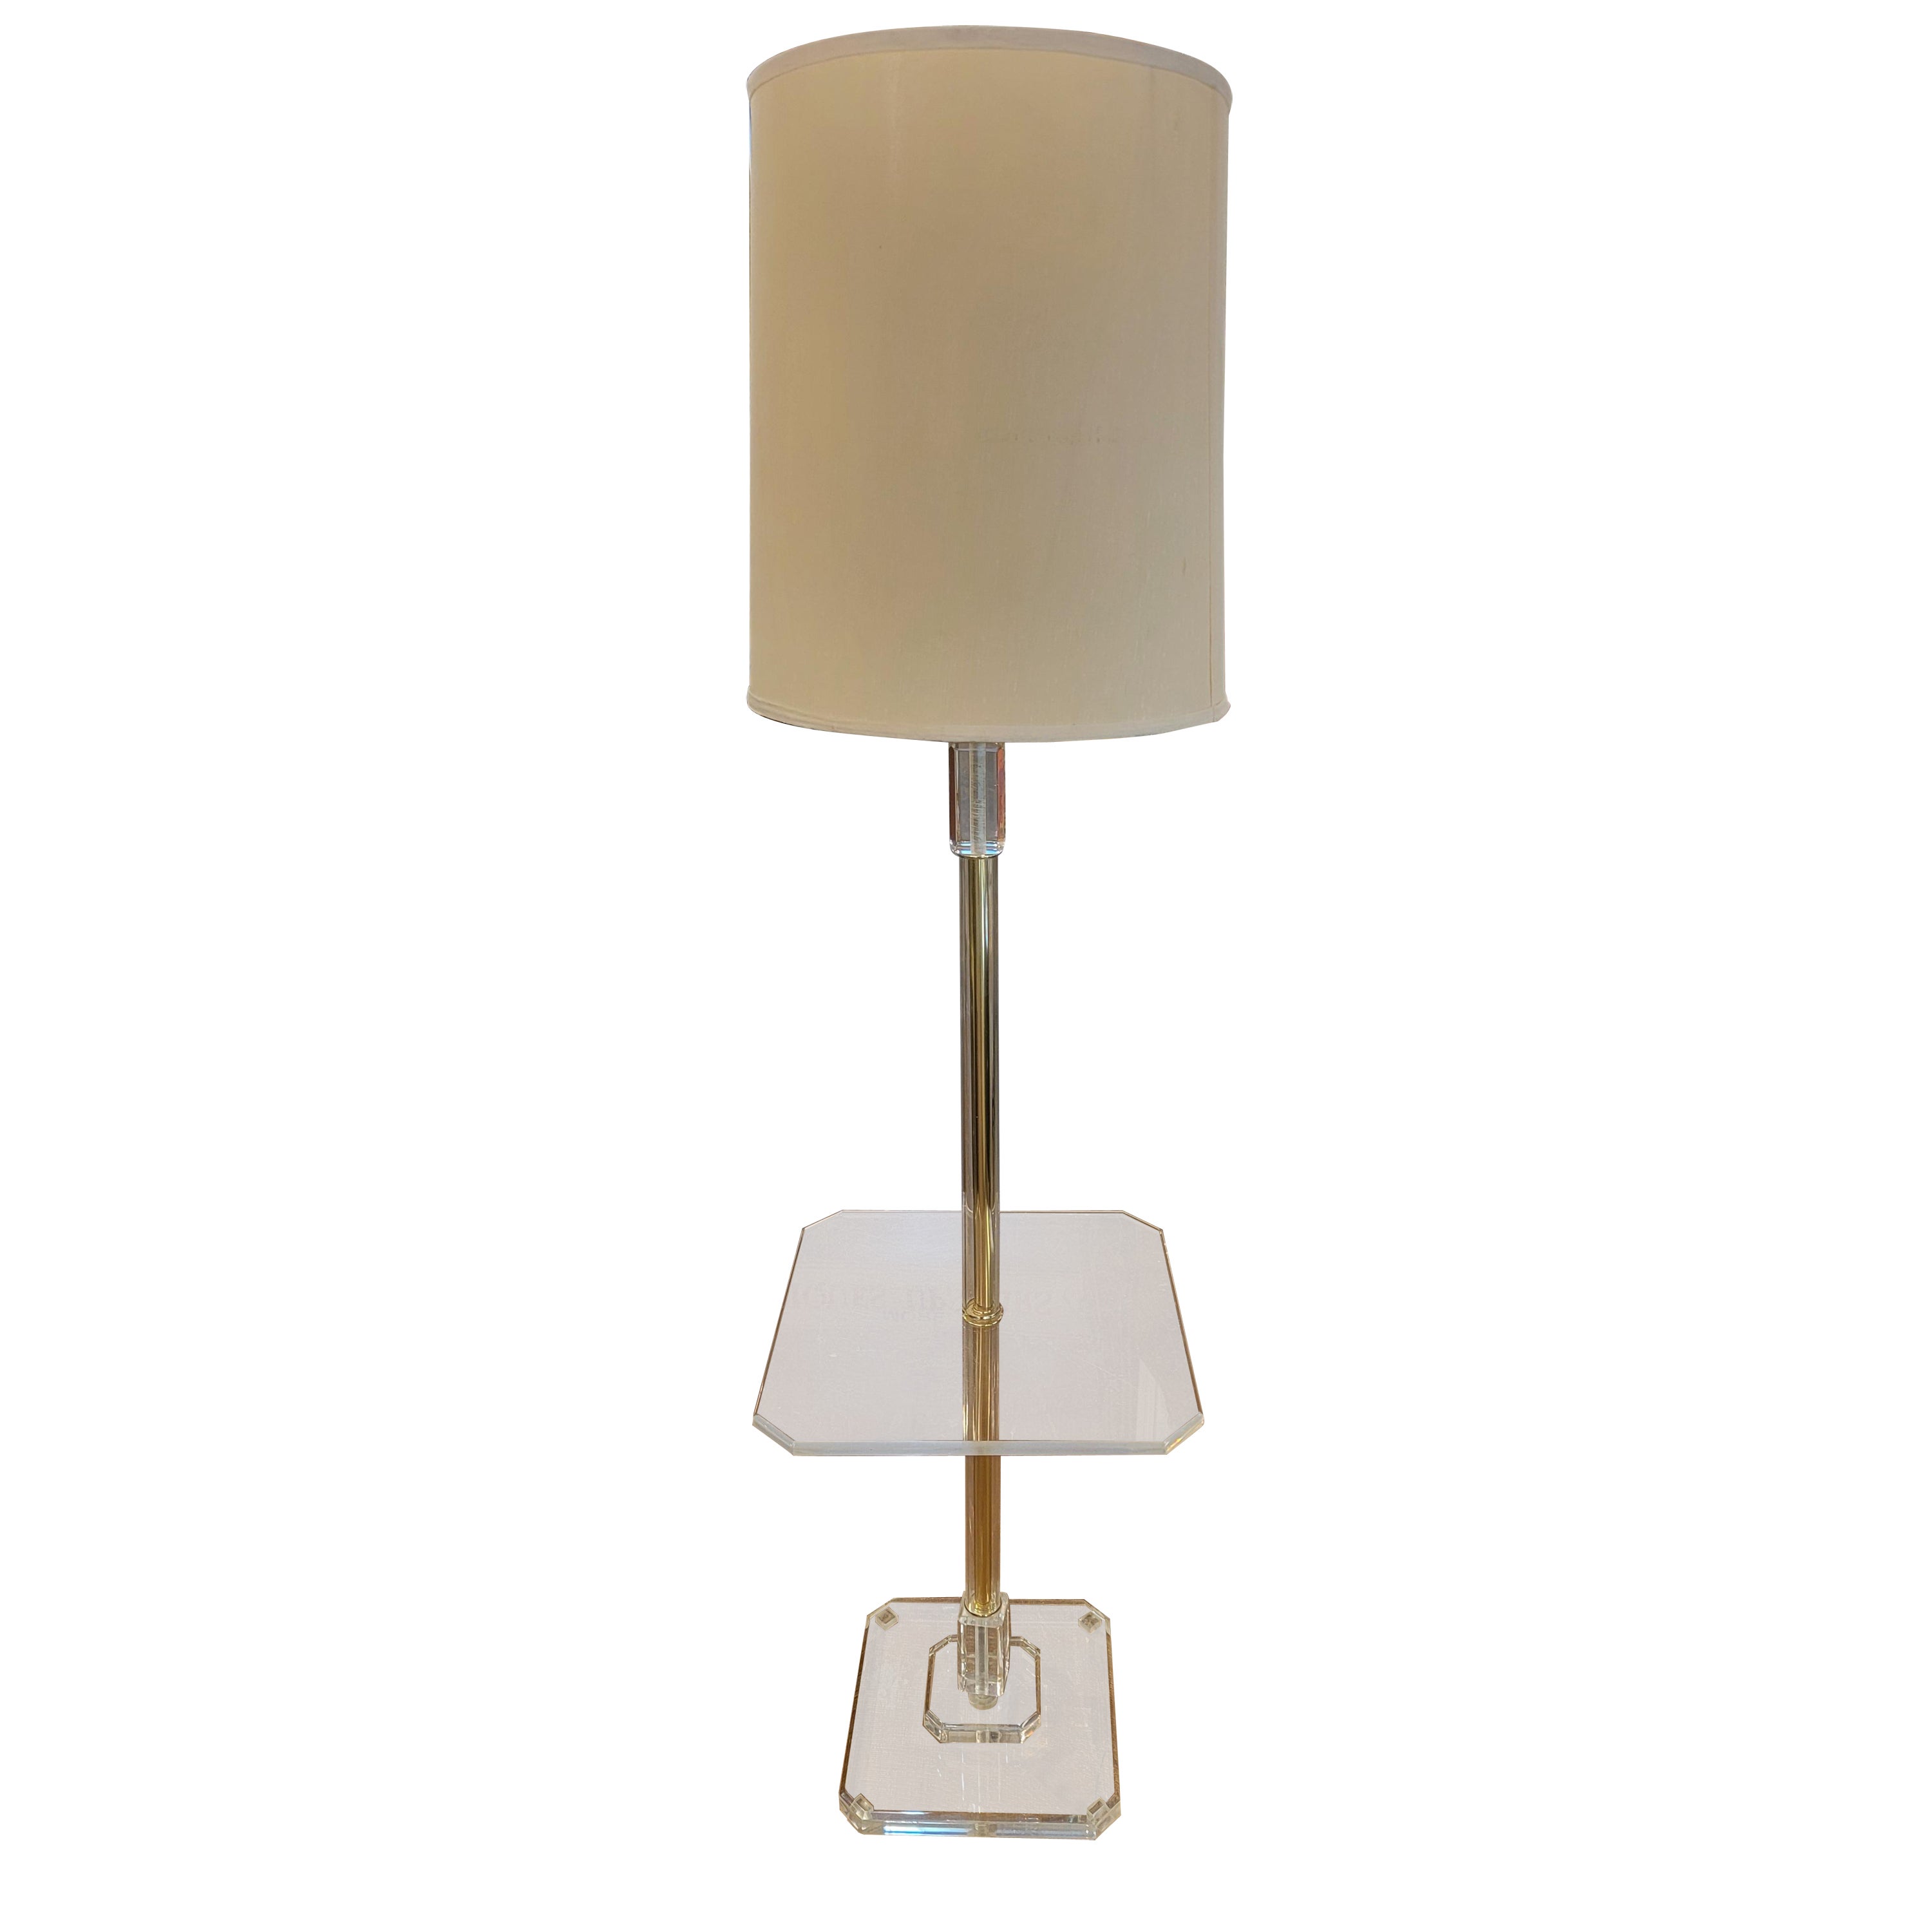 Italian Brass and Lucite Floor Lamp With Table Attached